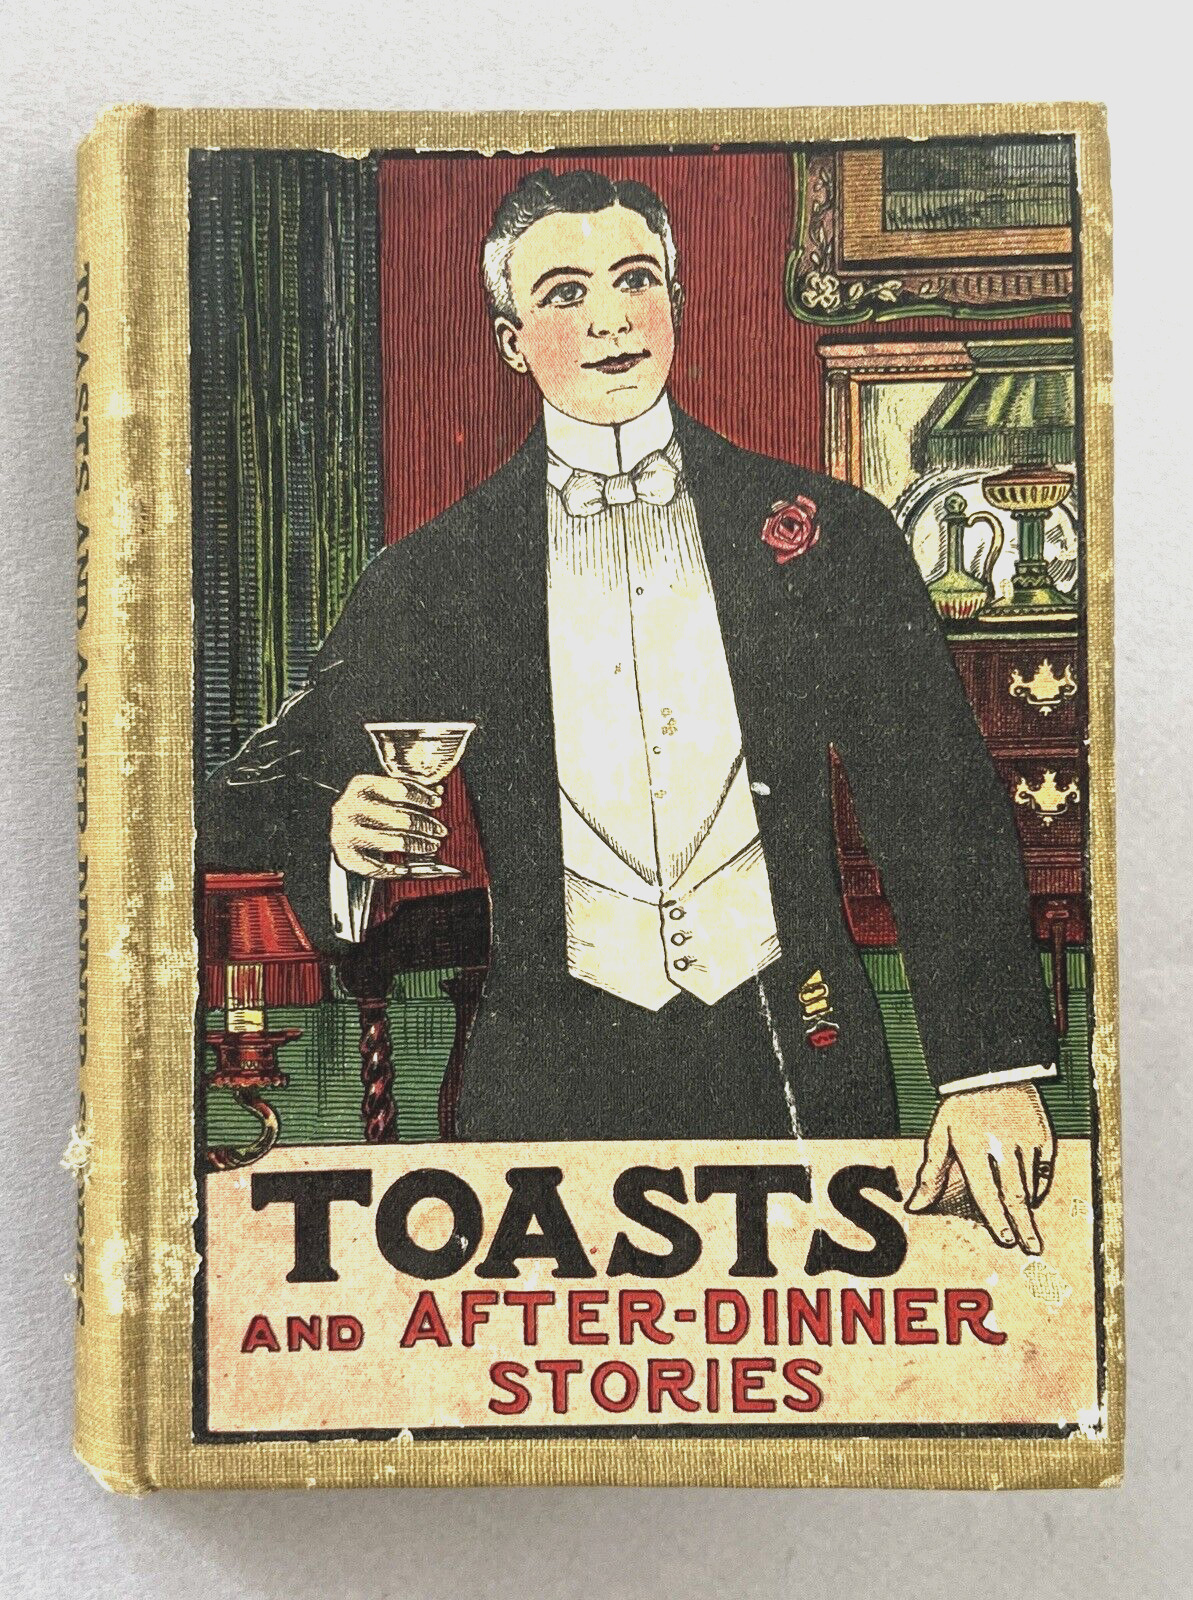 Vintage Original Ca. Early 1900s TOASTS AND AFTER DINNER STORIES